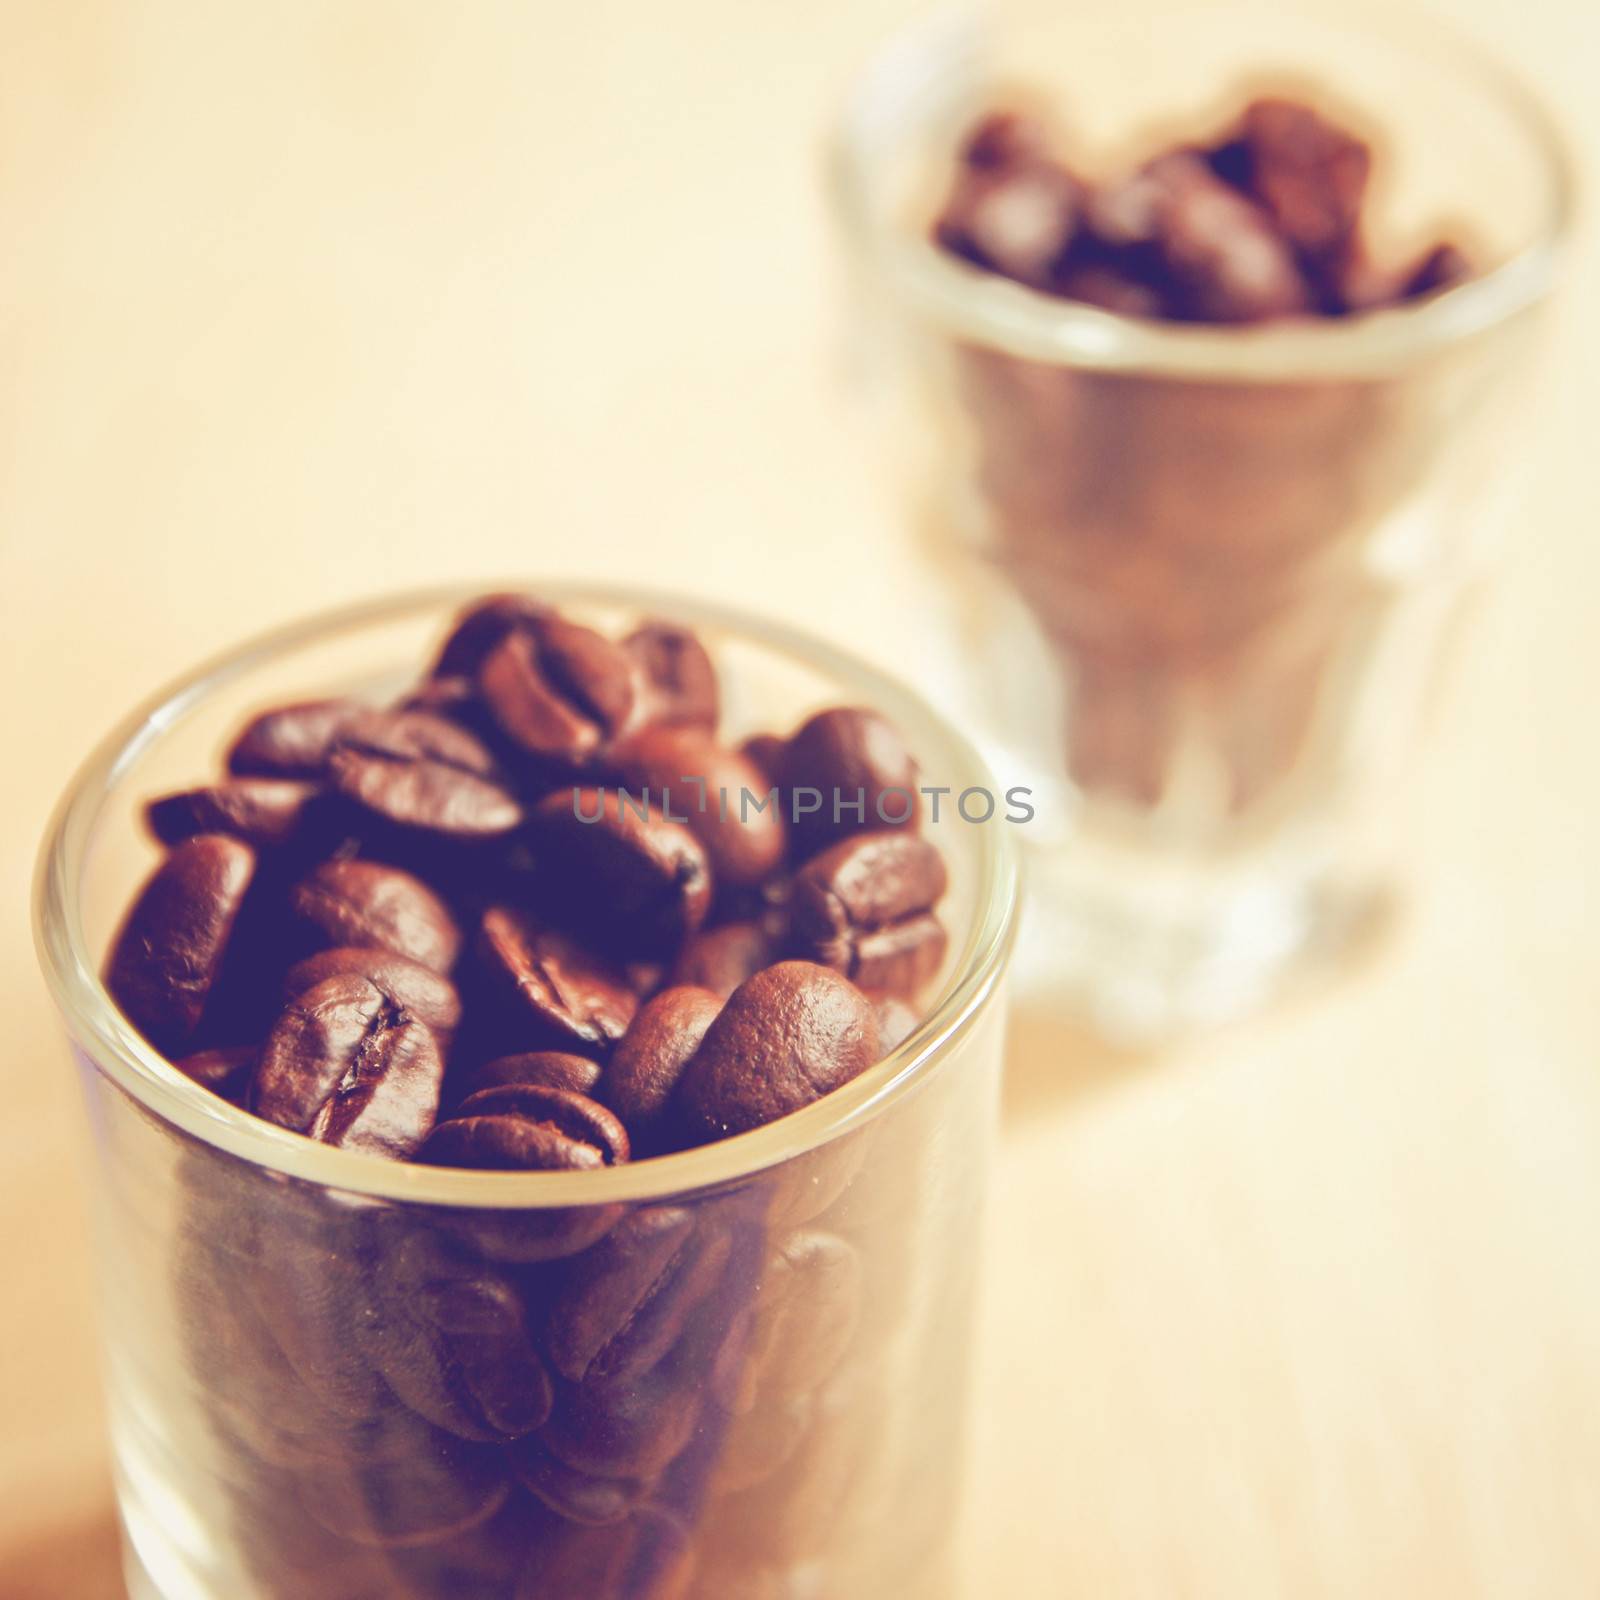 Coffee beans in glasses with retro filter effect by nuchylee